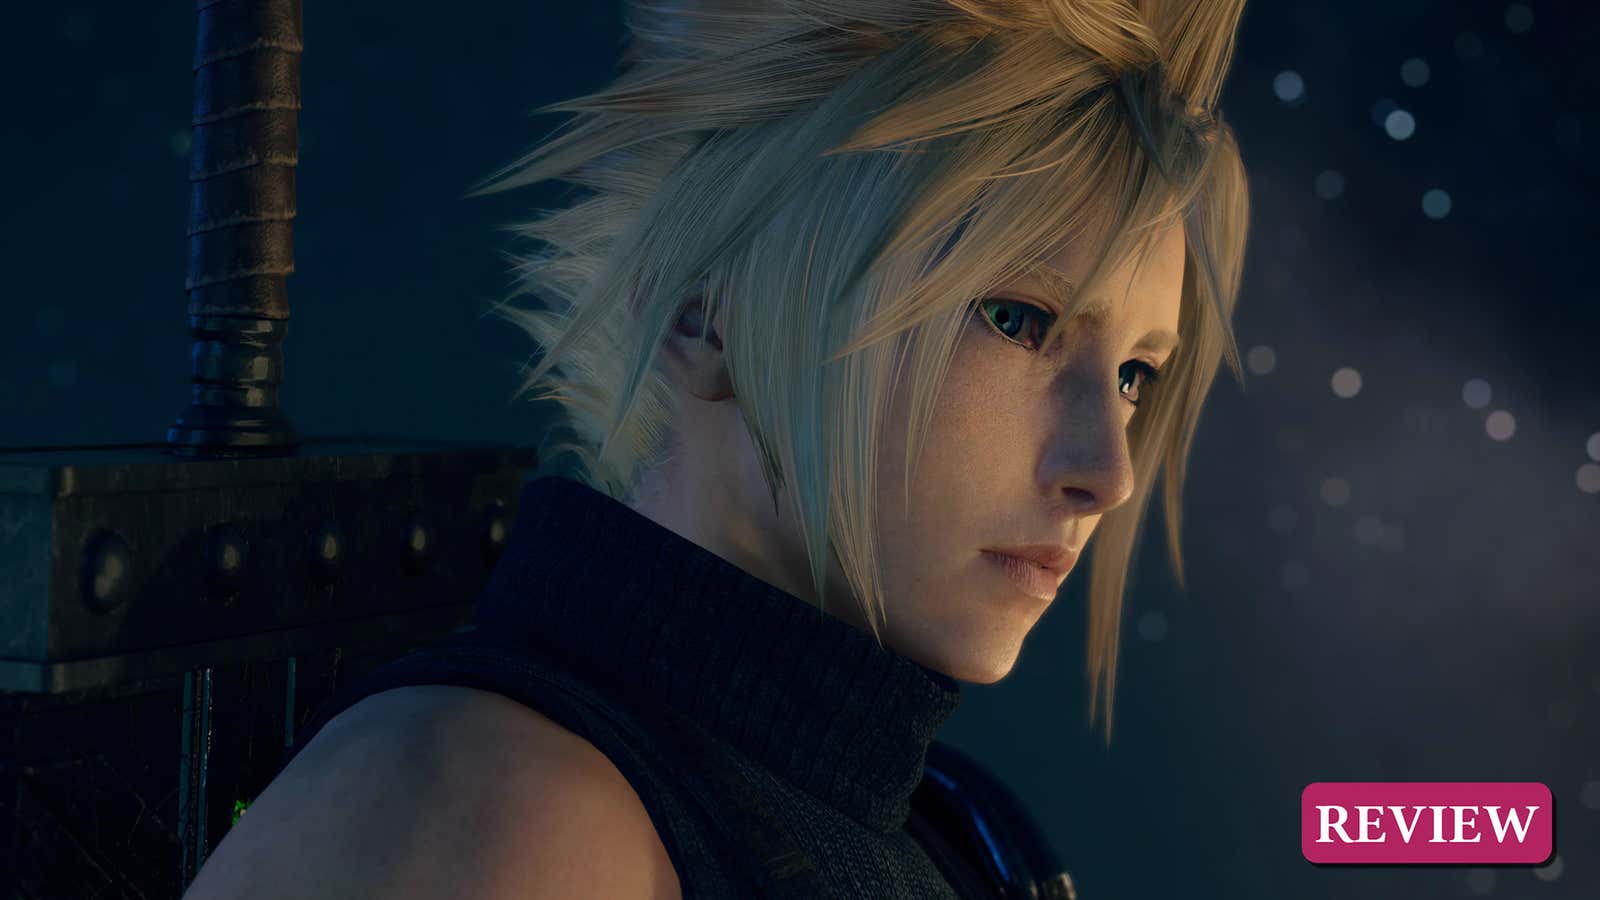 Final Fantasy 7 Rebirth Feels Like a Strong Step Forward from Remake